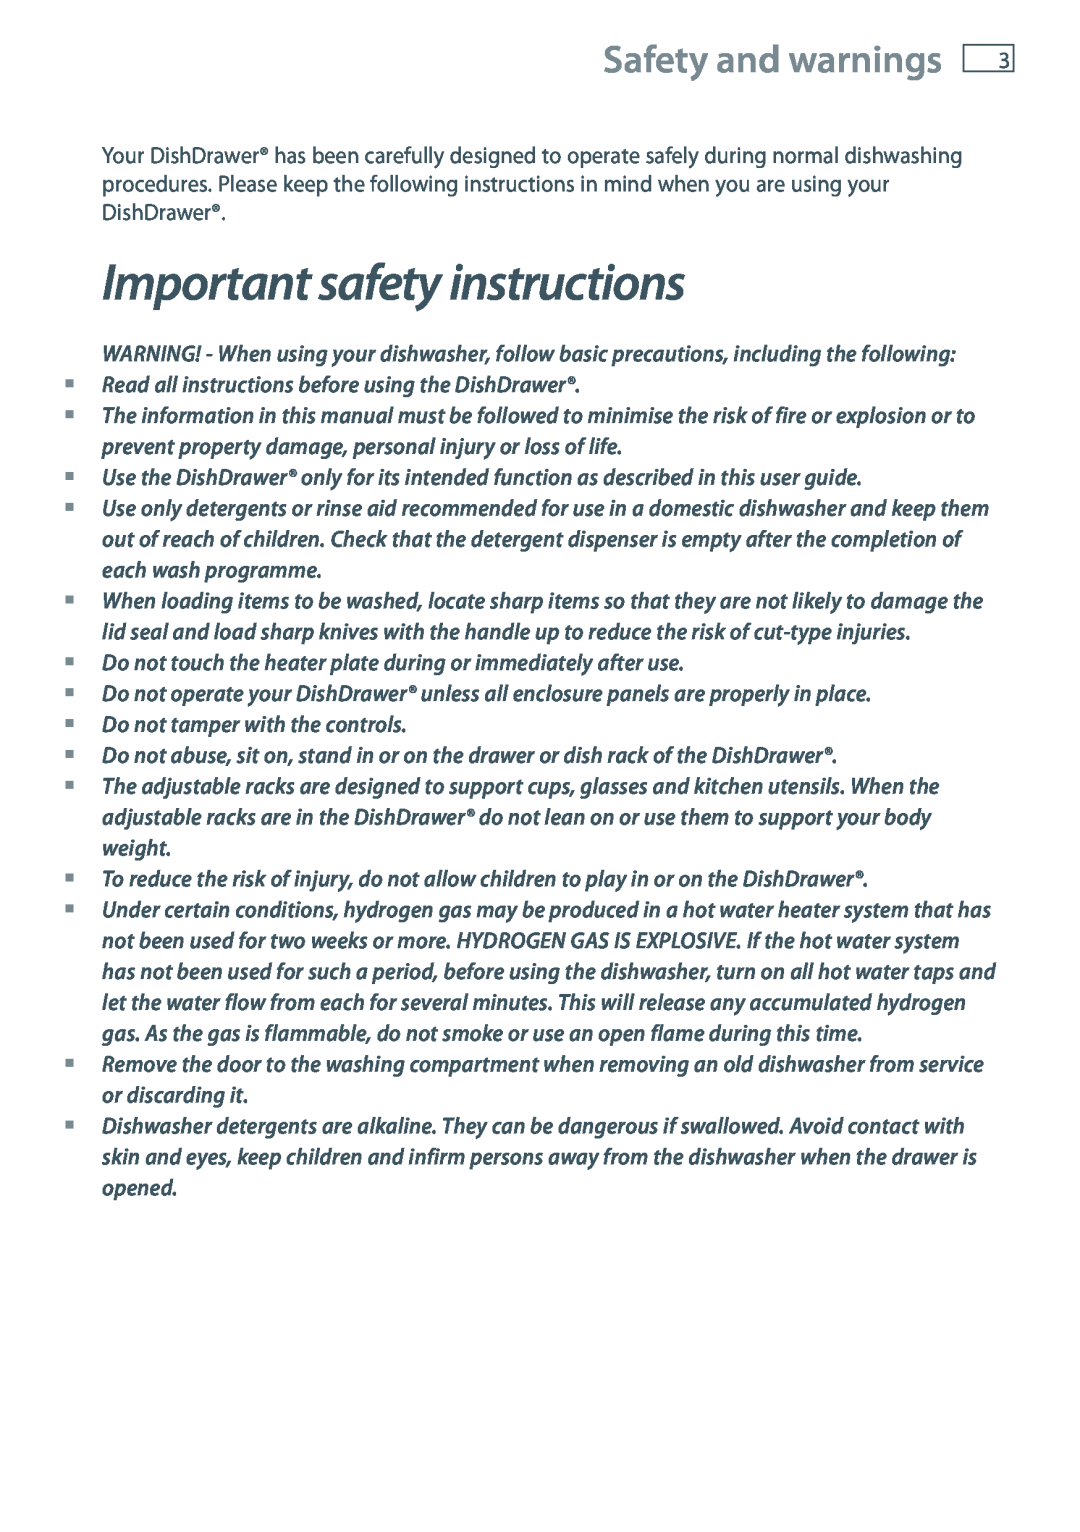 Fisher & Paykel DD60 manual Important safety instructions, Safety and warnings 